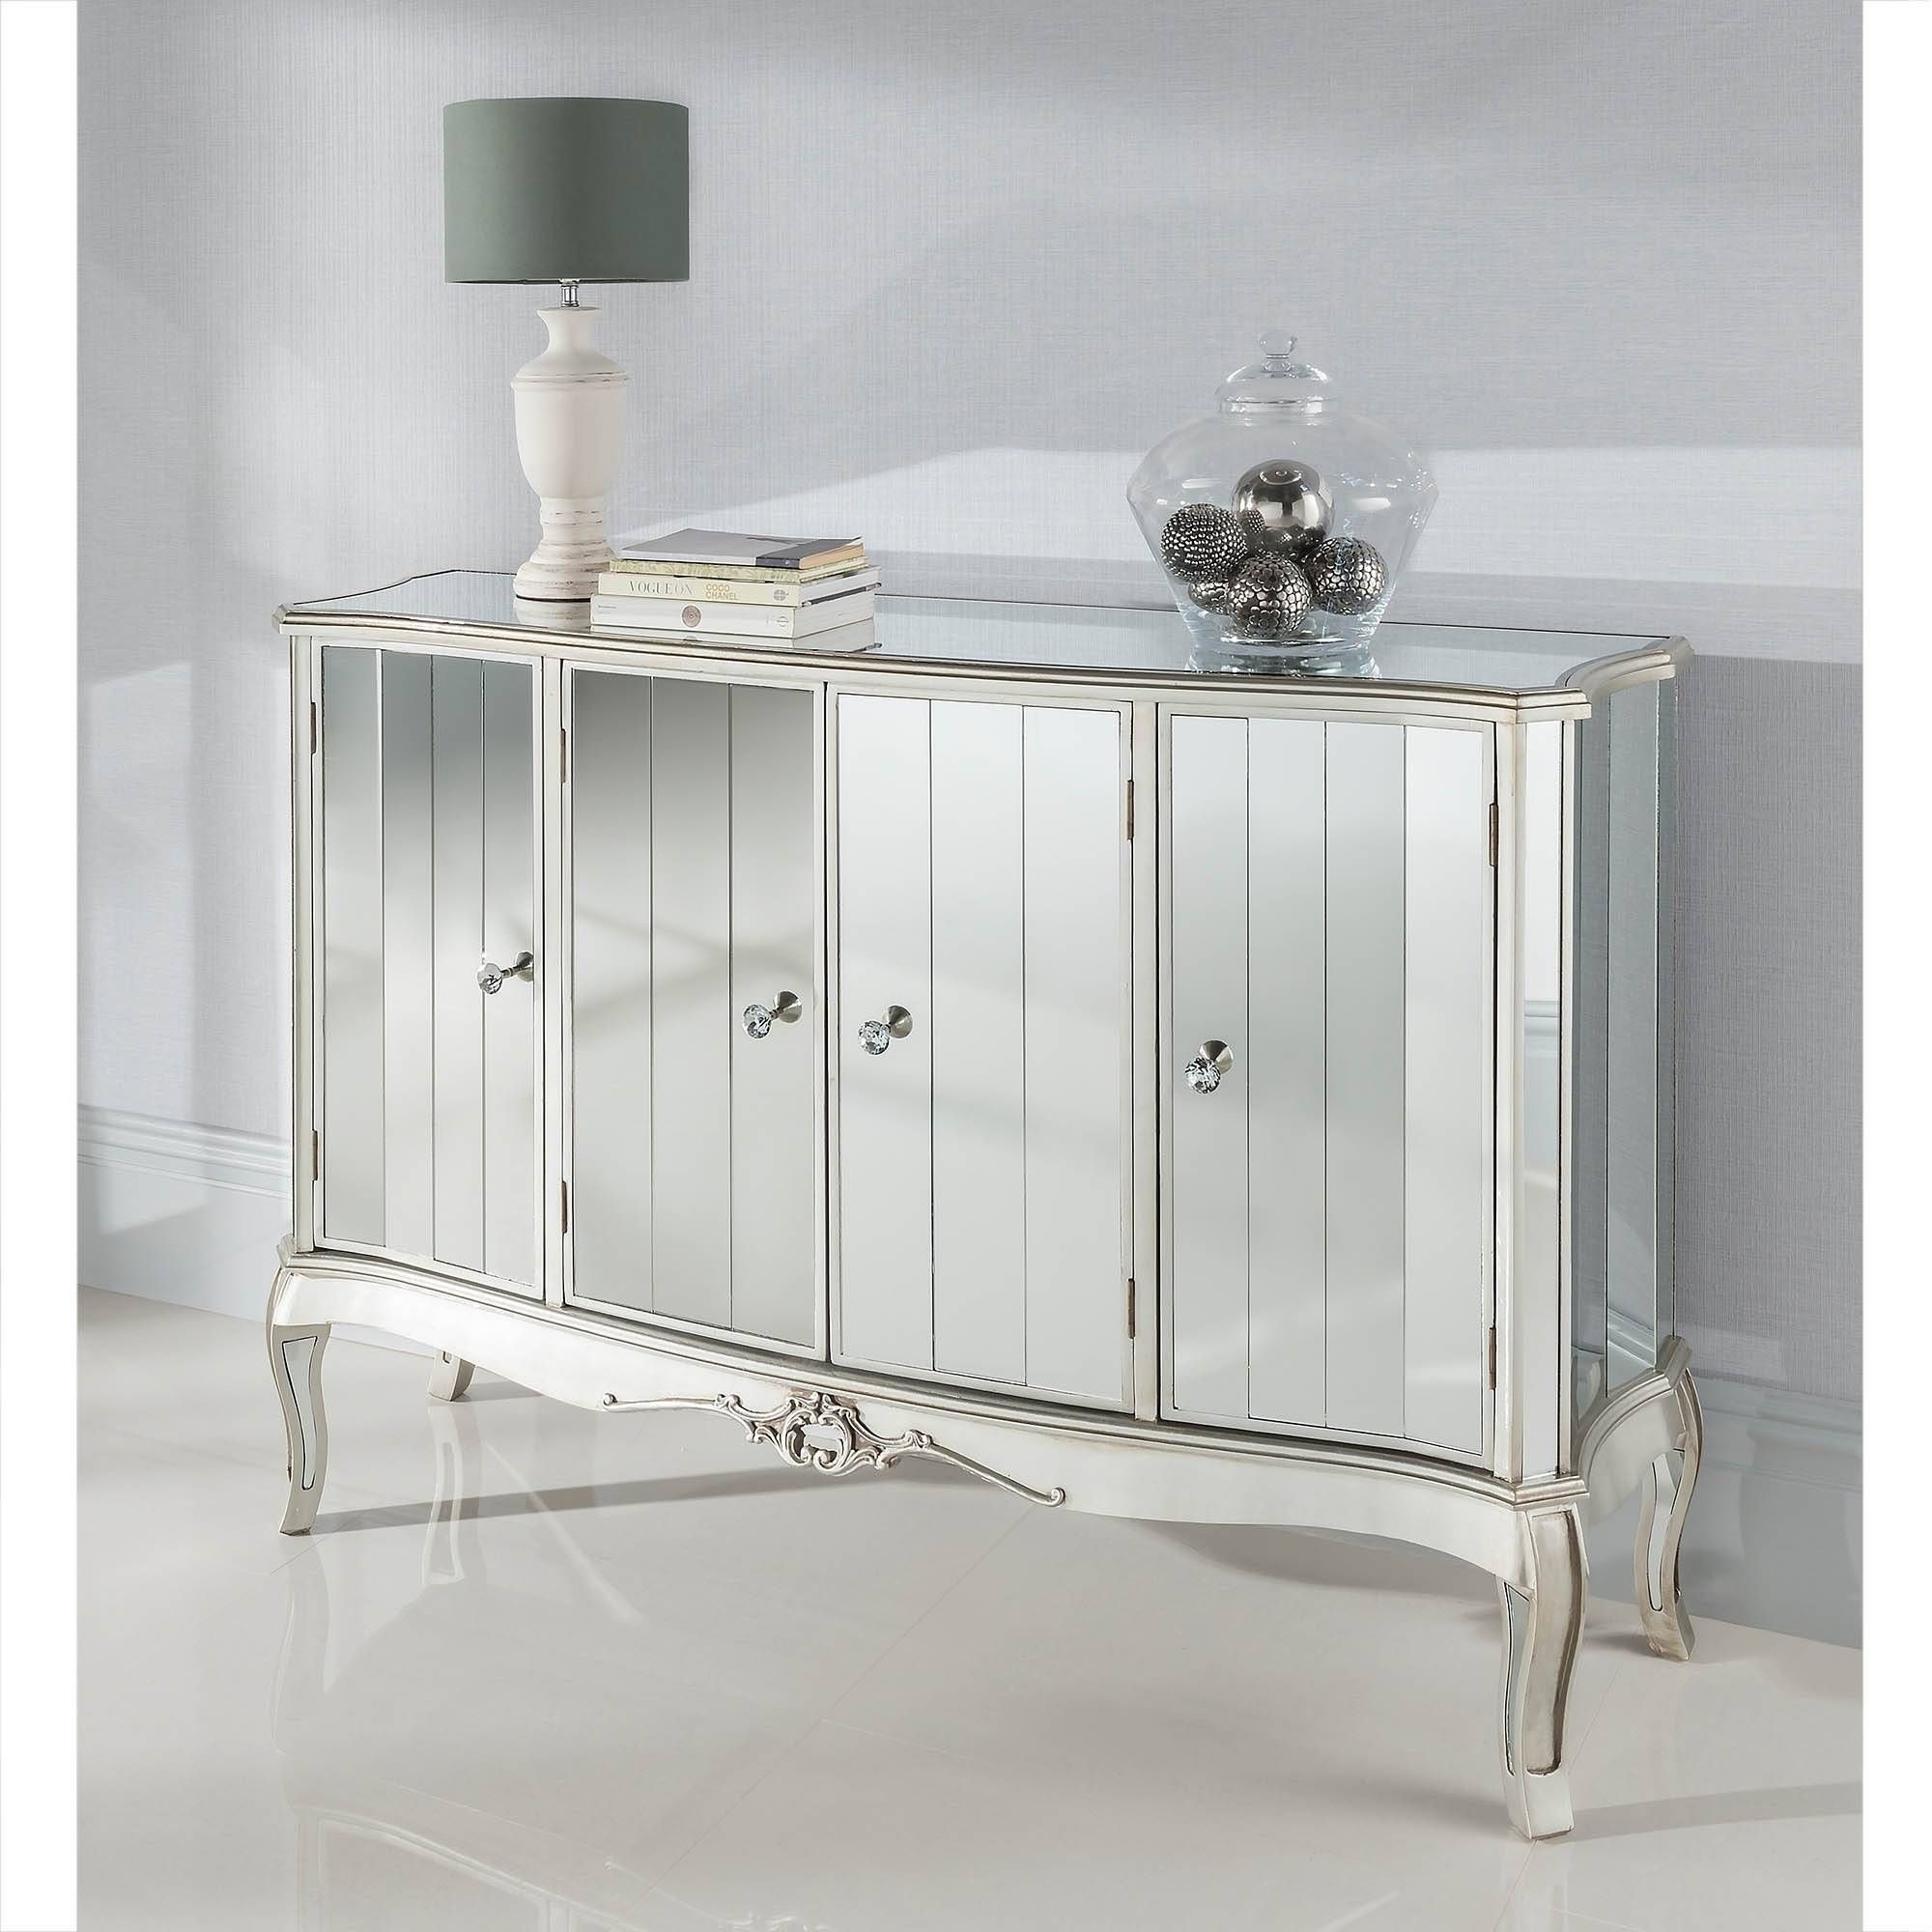 Argente Mirrored Four Door Sideboard | Mirrored Furniture Inside Mirrored Sideboard (Photo 8 of 20)